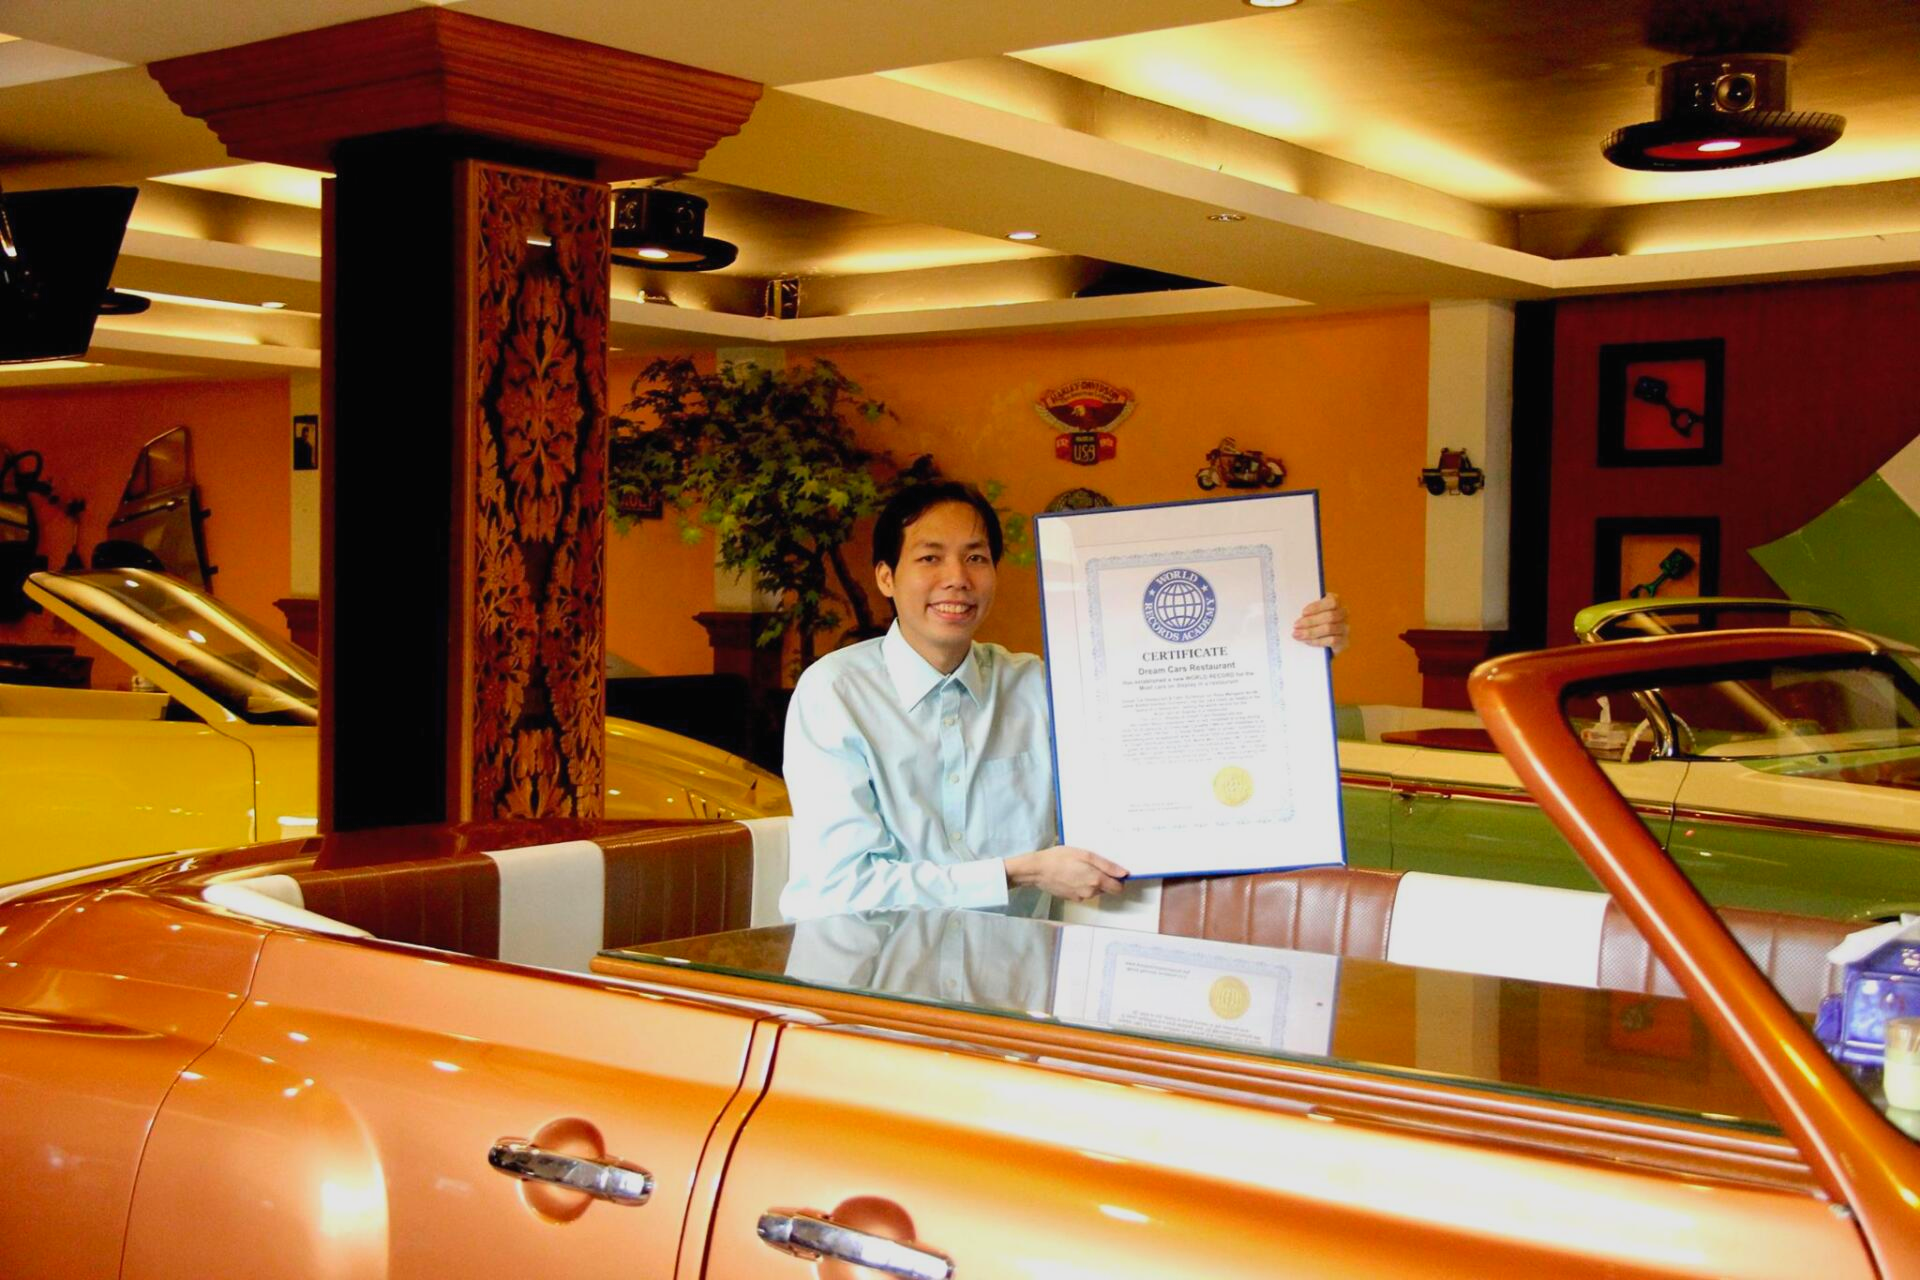 Most cars on display in a restaurant: Dream Cars Restaurant sets world record